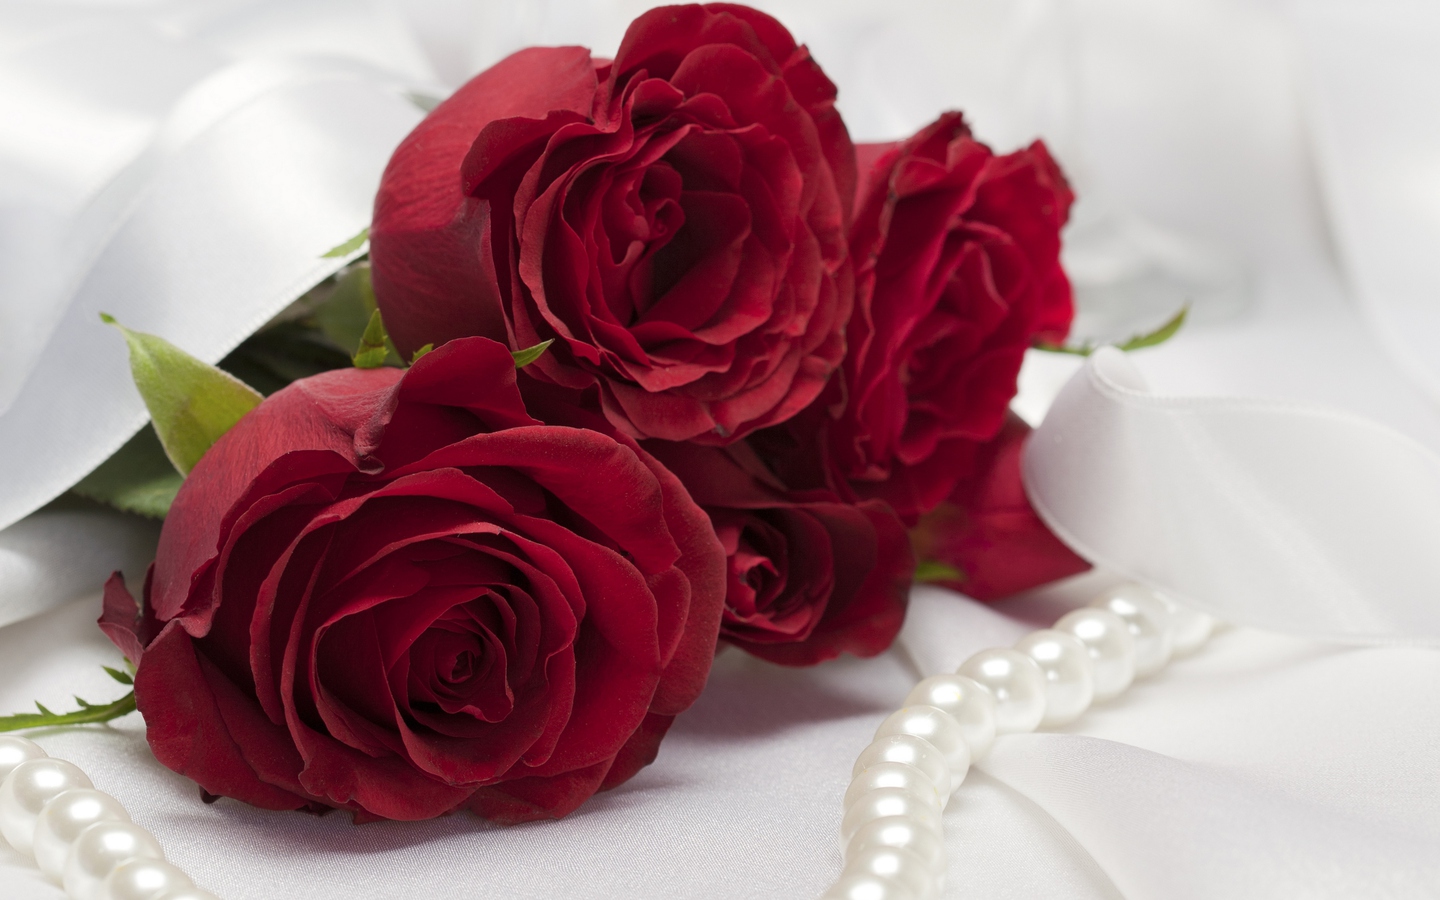 Hd Wallpapers Free Romantic Valentine S Day Red Rose - HD Wallpaper 